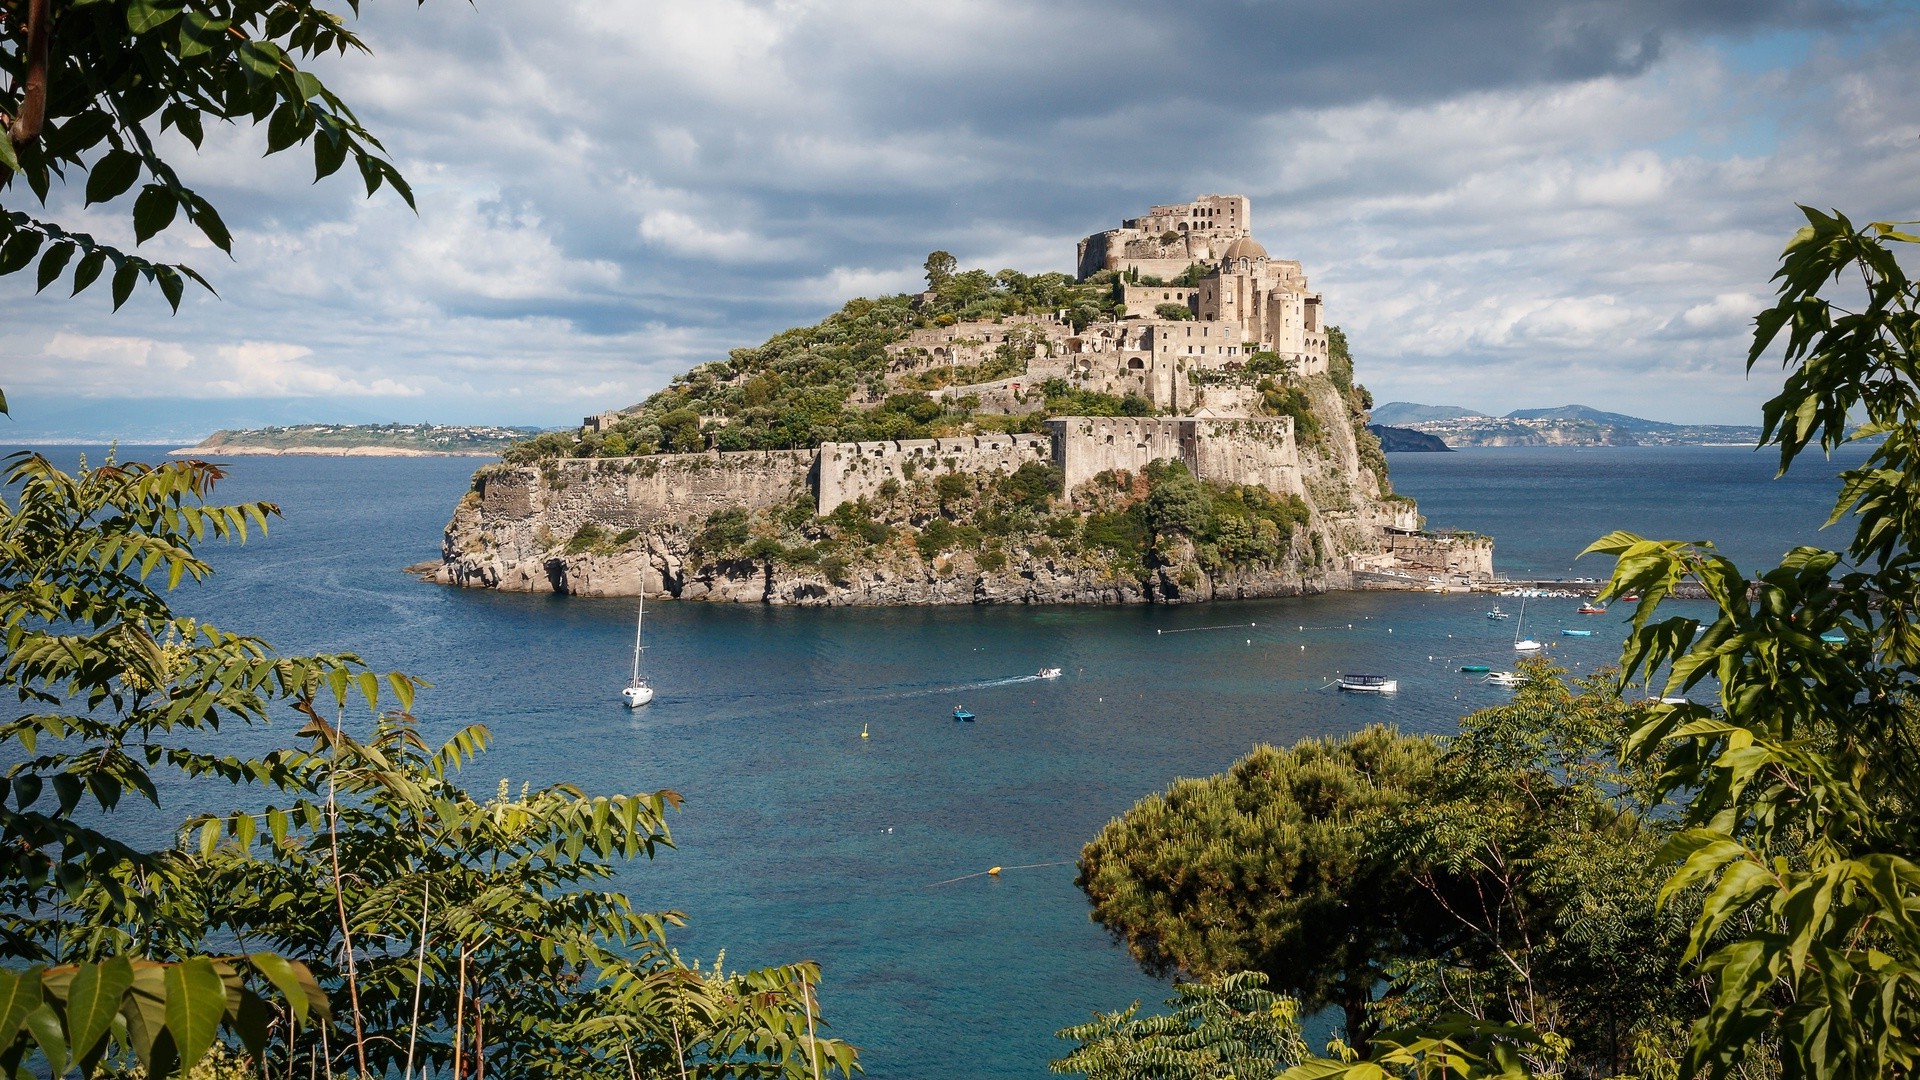 nature, Architecture, Landscape, Old Building, Hill, Trees, House, Italy, Monastery, Island, Clouds, Sea, Boat, Yachts Wallpaper